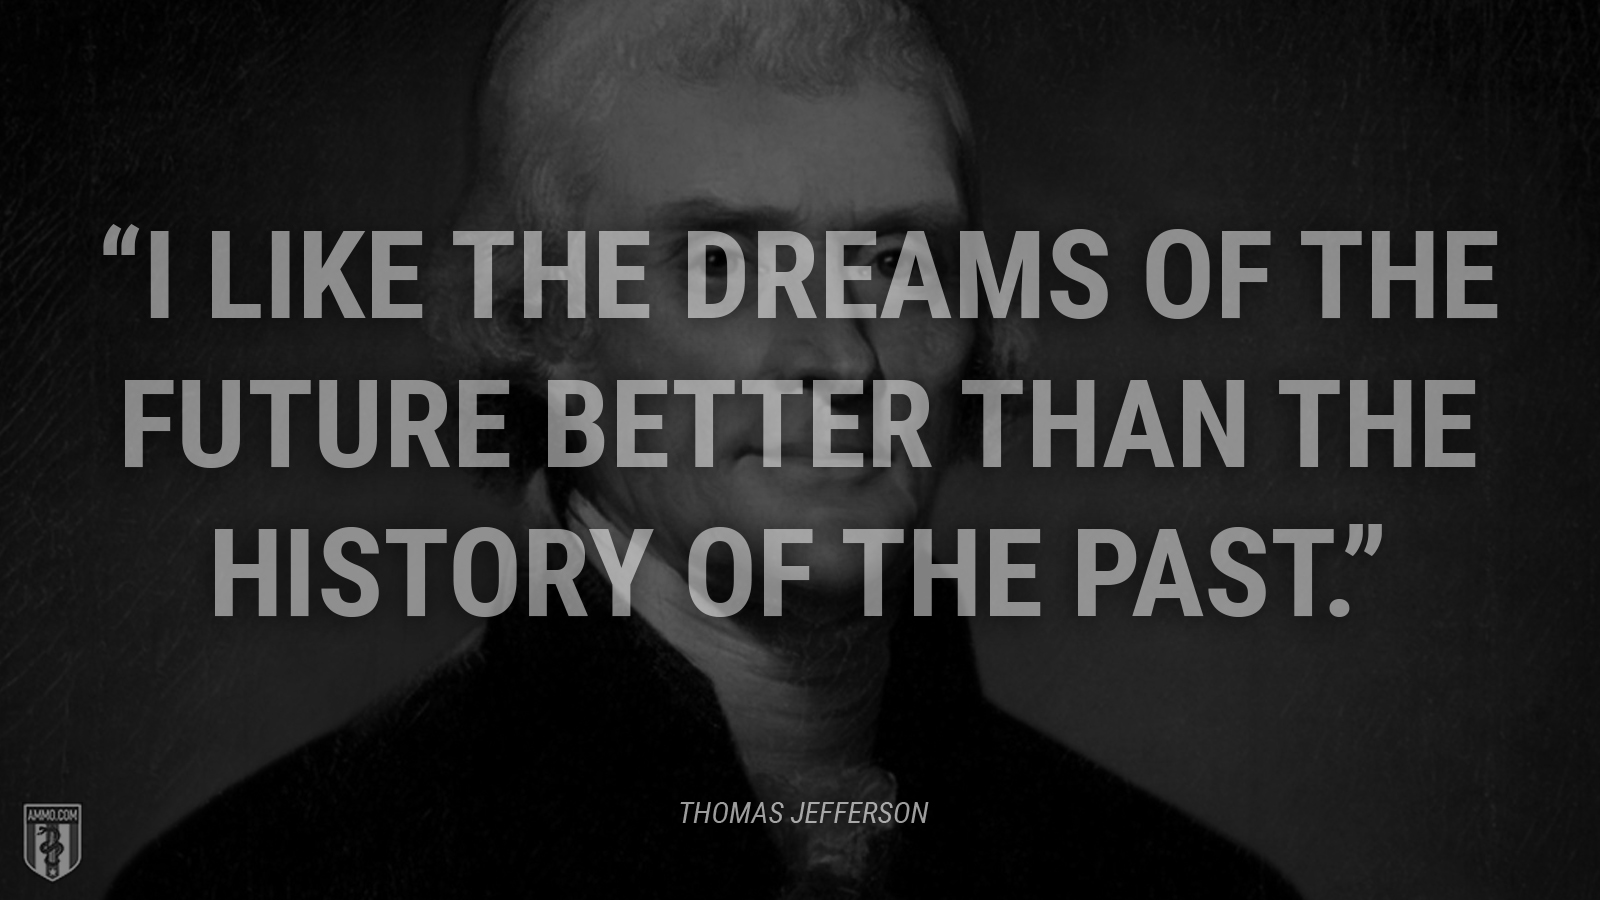 “I like the dreams of the future better than the history of the past.” - Thomas Jefferson